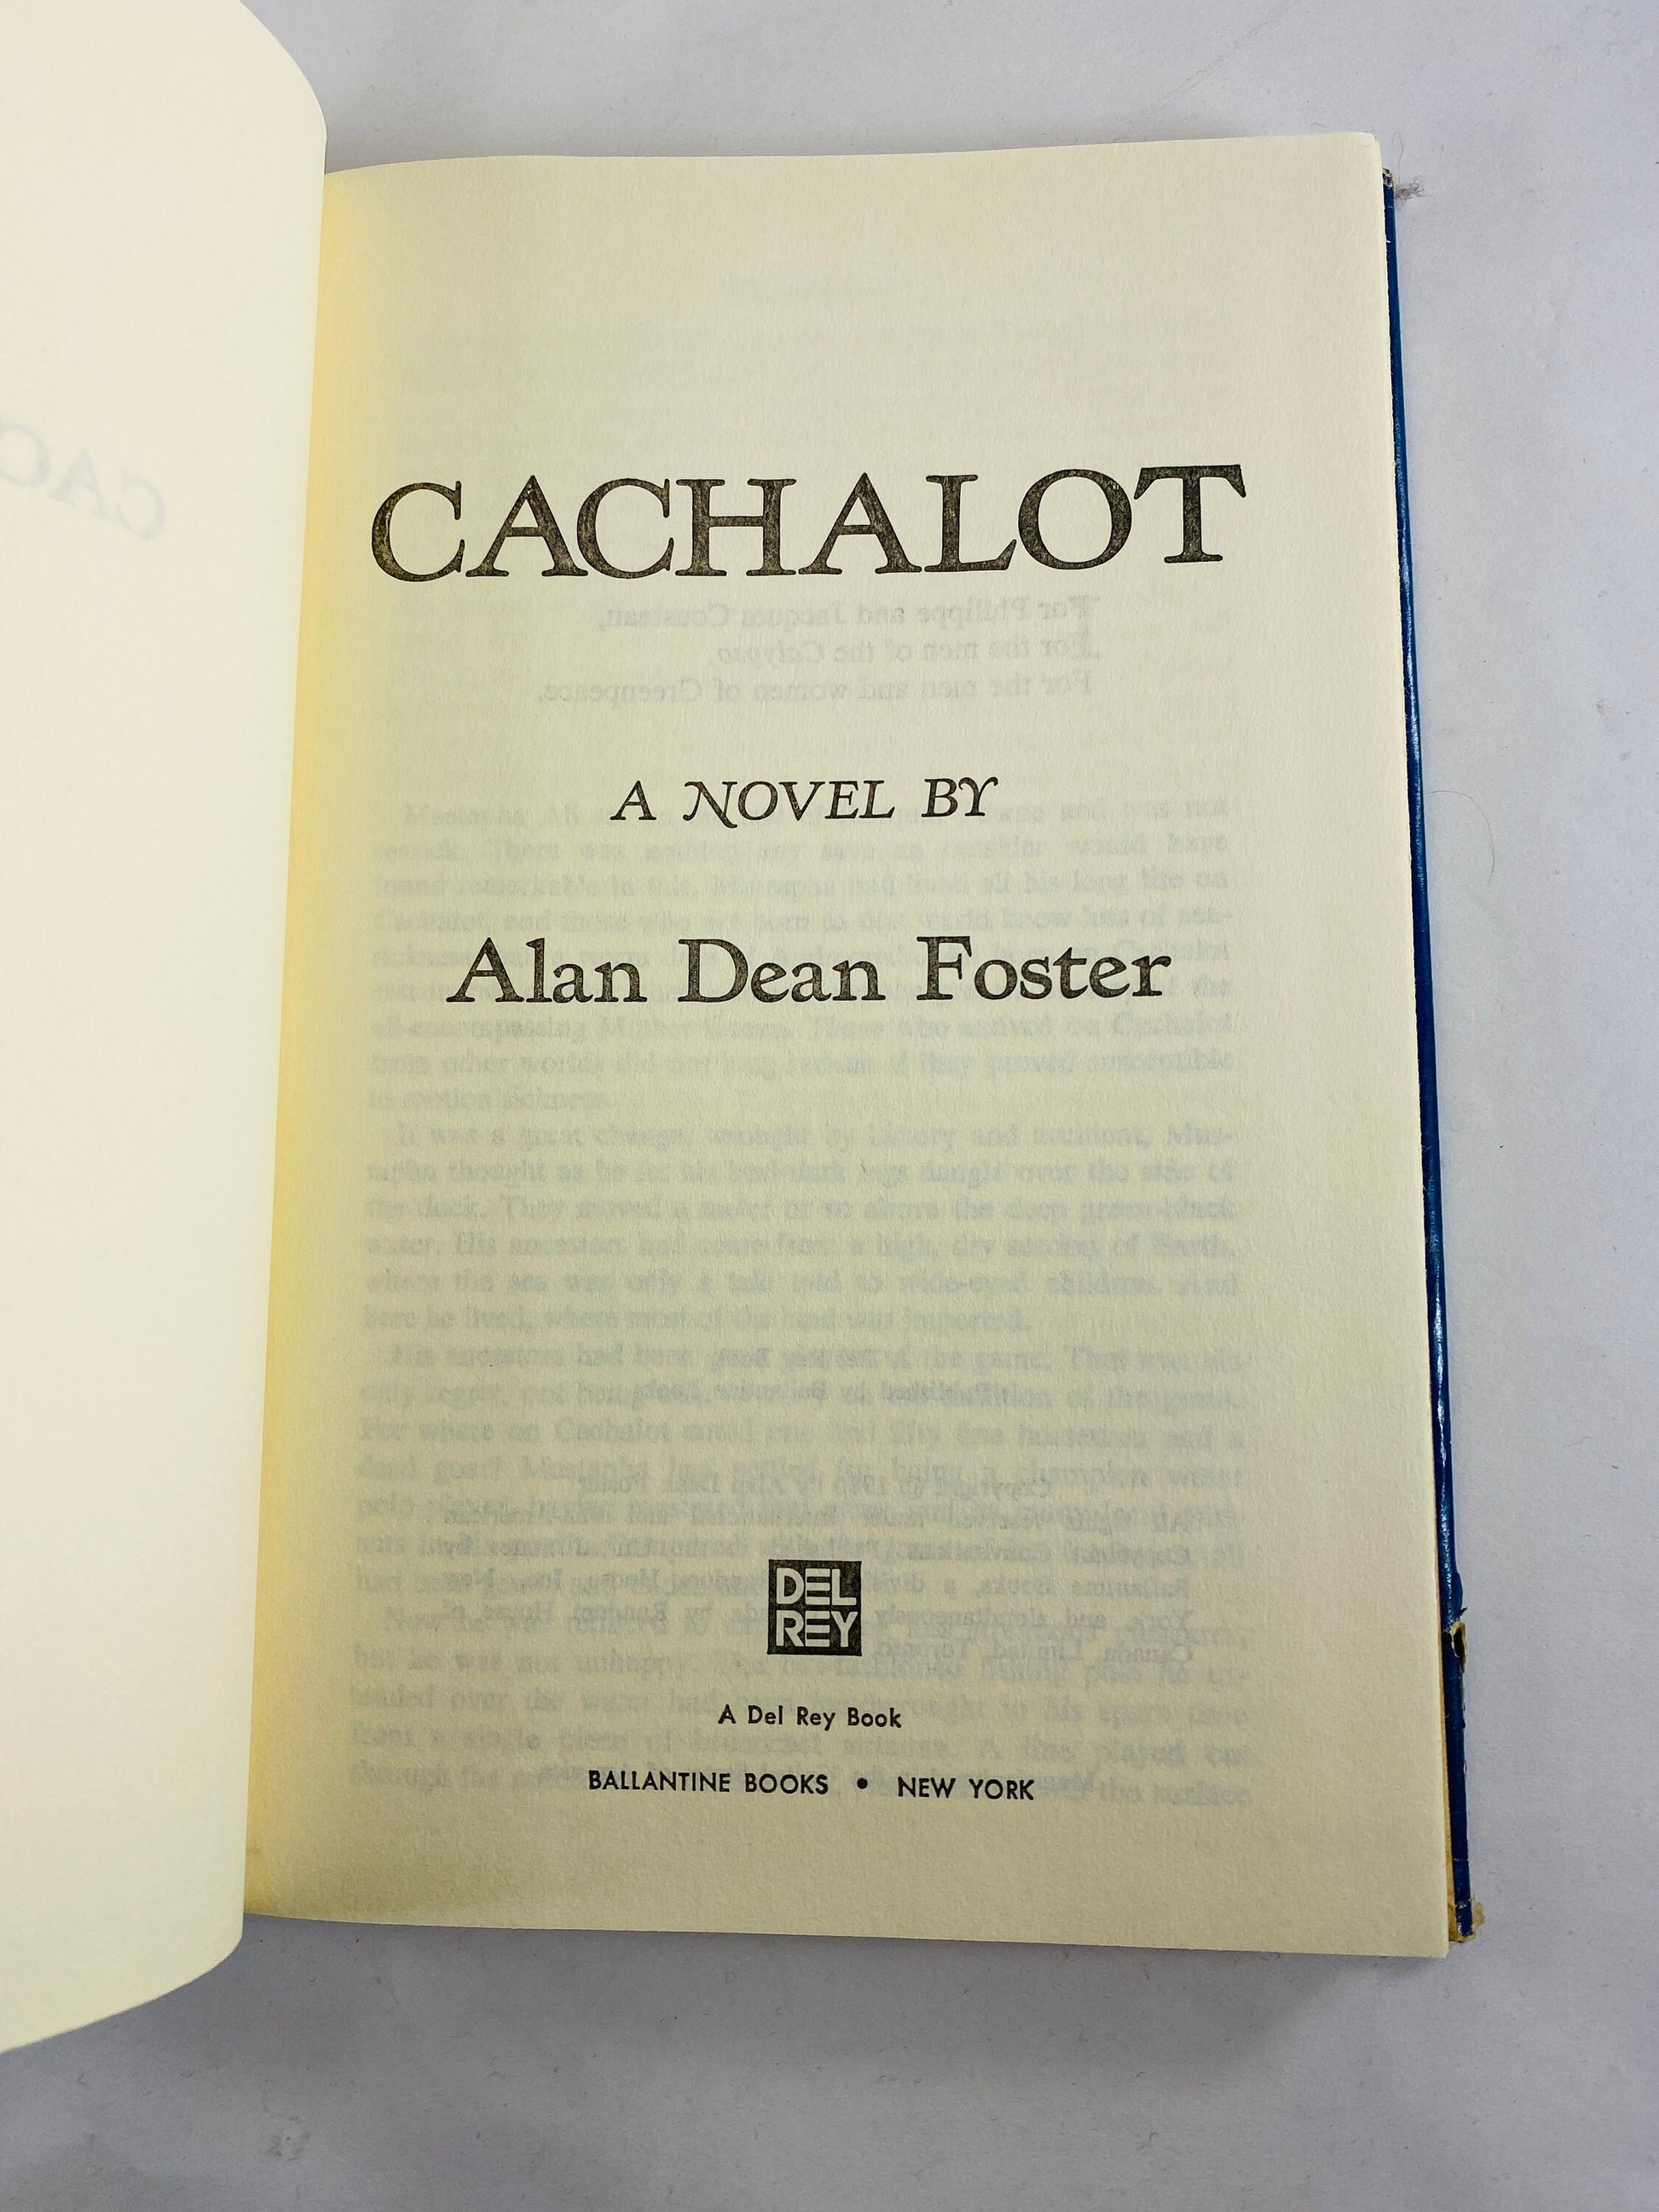 Cachalot vintage book by Alan Dean Foster about an ocean planet for the great sea-creatures hunted near to extinction. 1980 science fiction